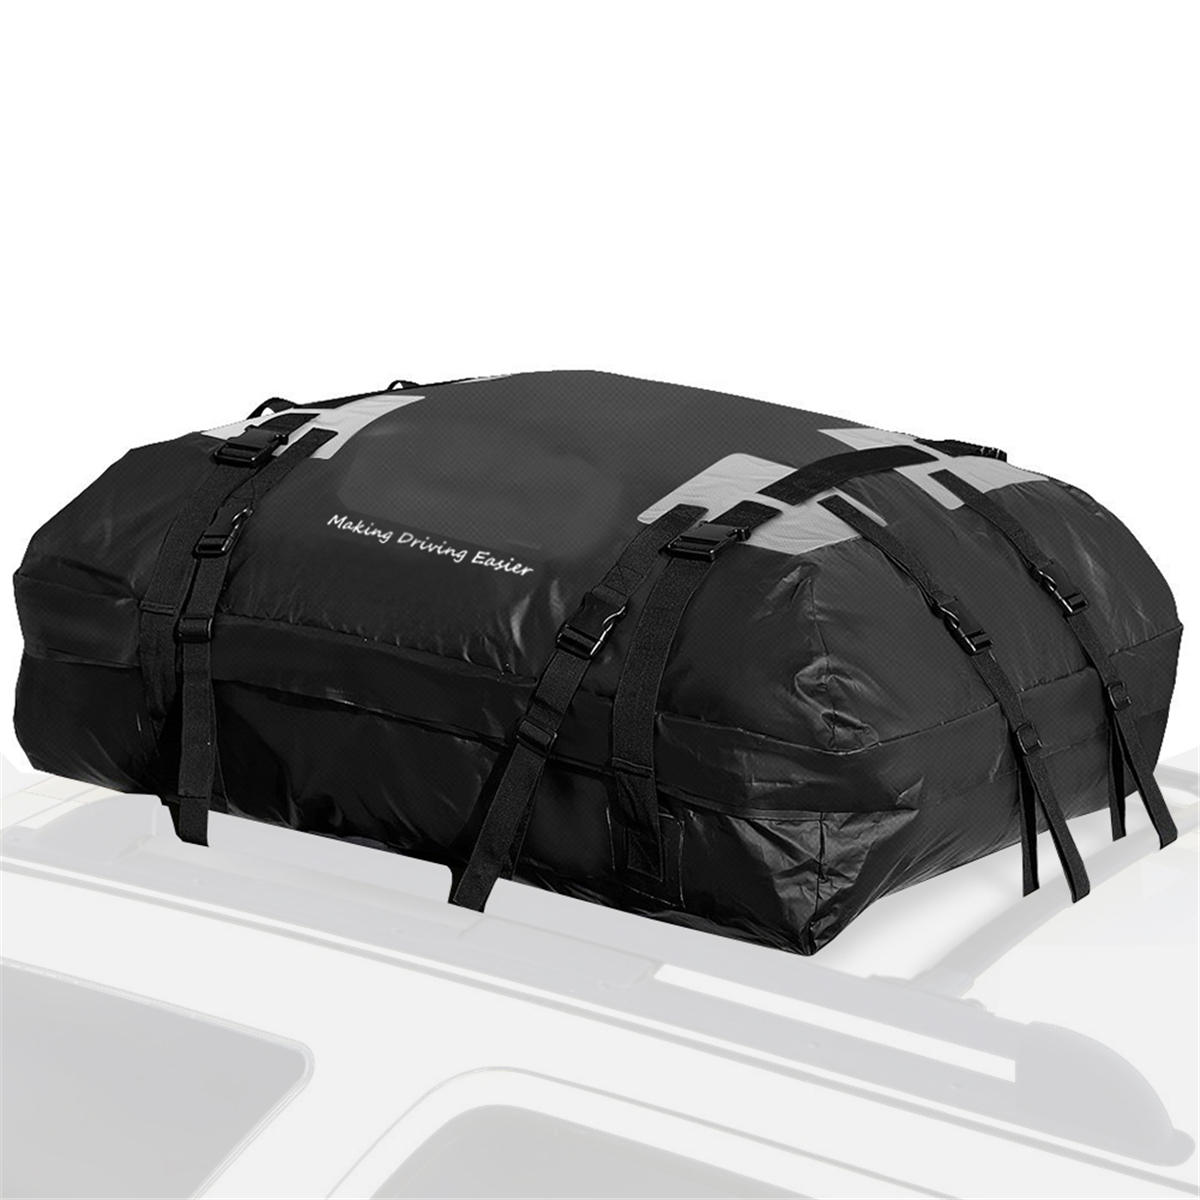 Outdoor Travel Car Roof Rack Tas Pack Waterproof Cargo Carrier Luggage Storage Pouch